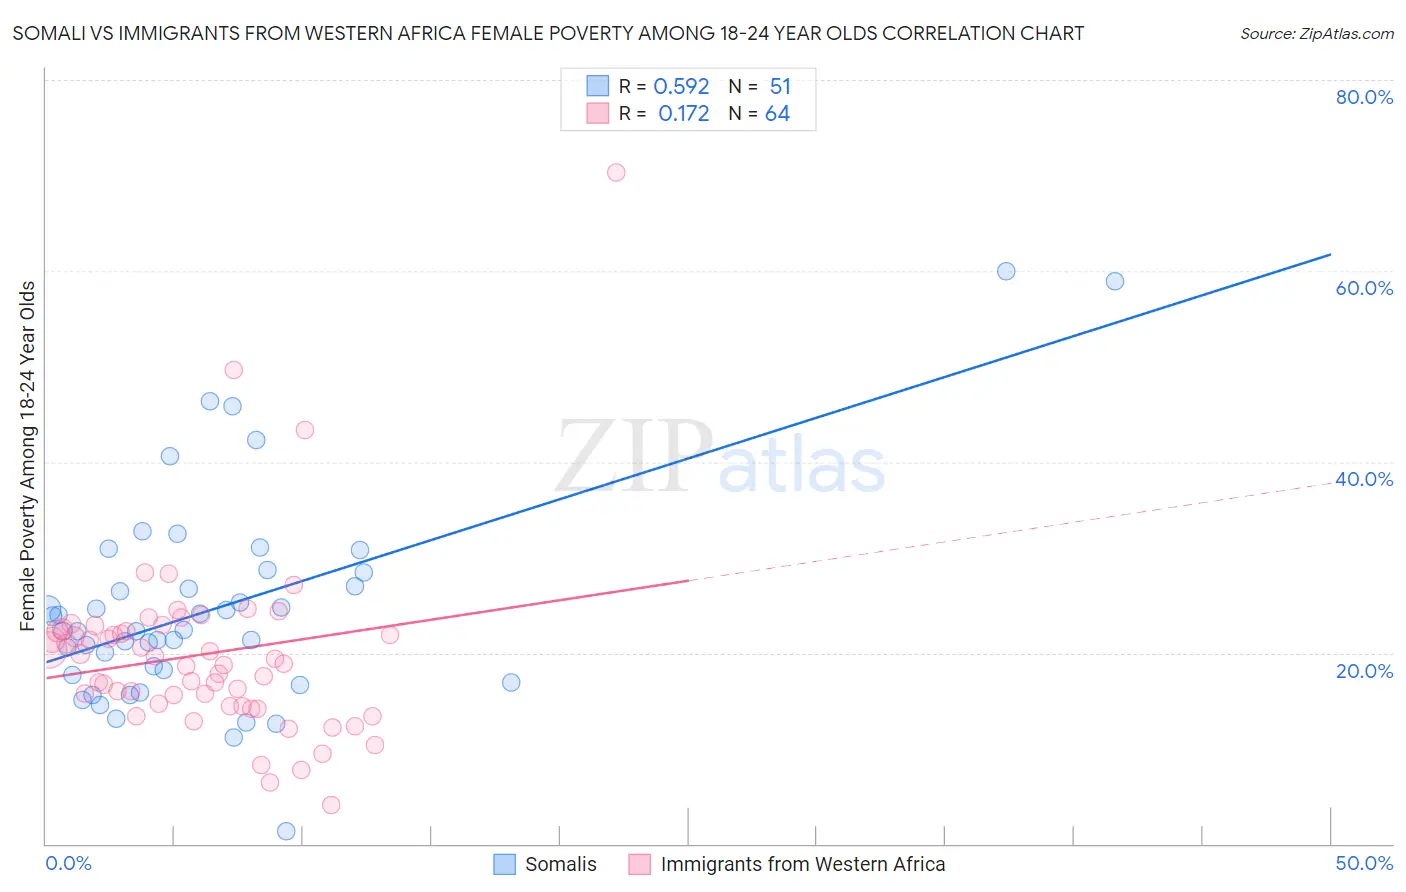 Somali vs Immigrants from Western Africa Female Poverty Among 18-24 Year Olds